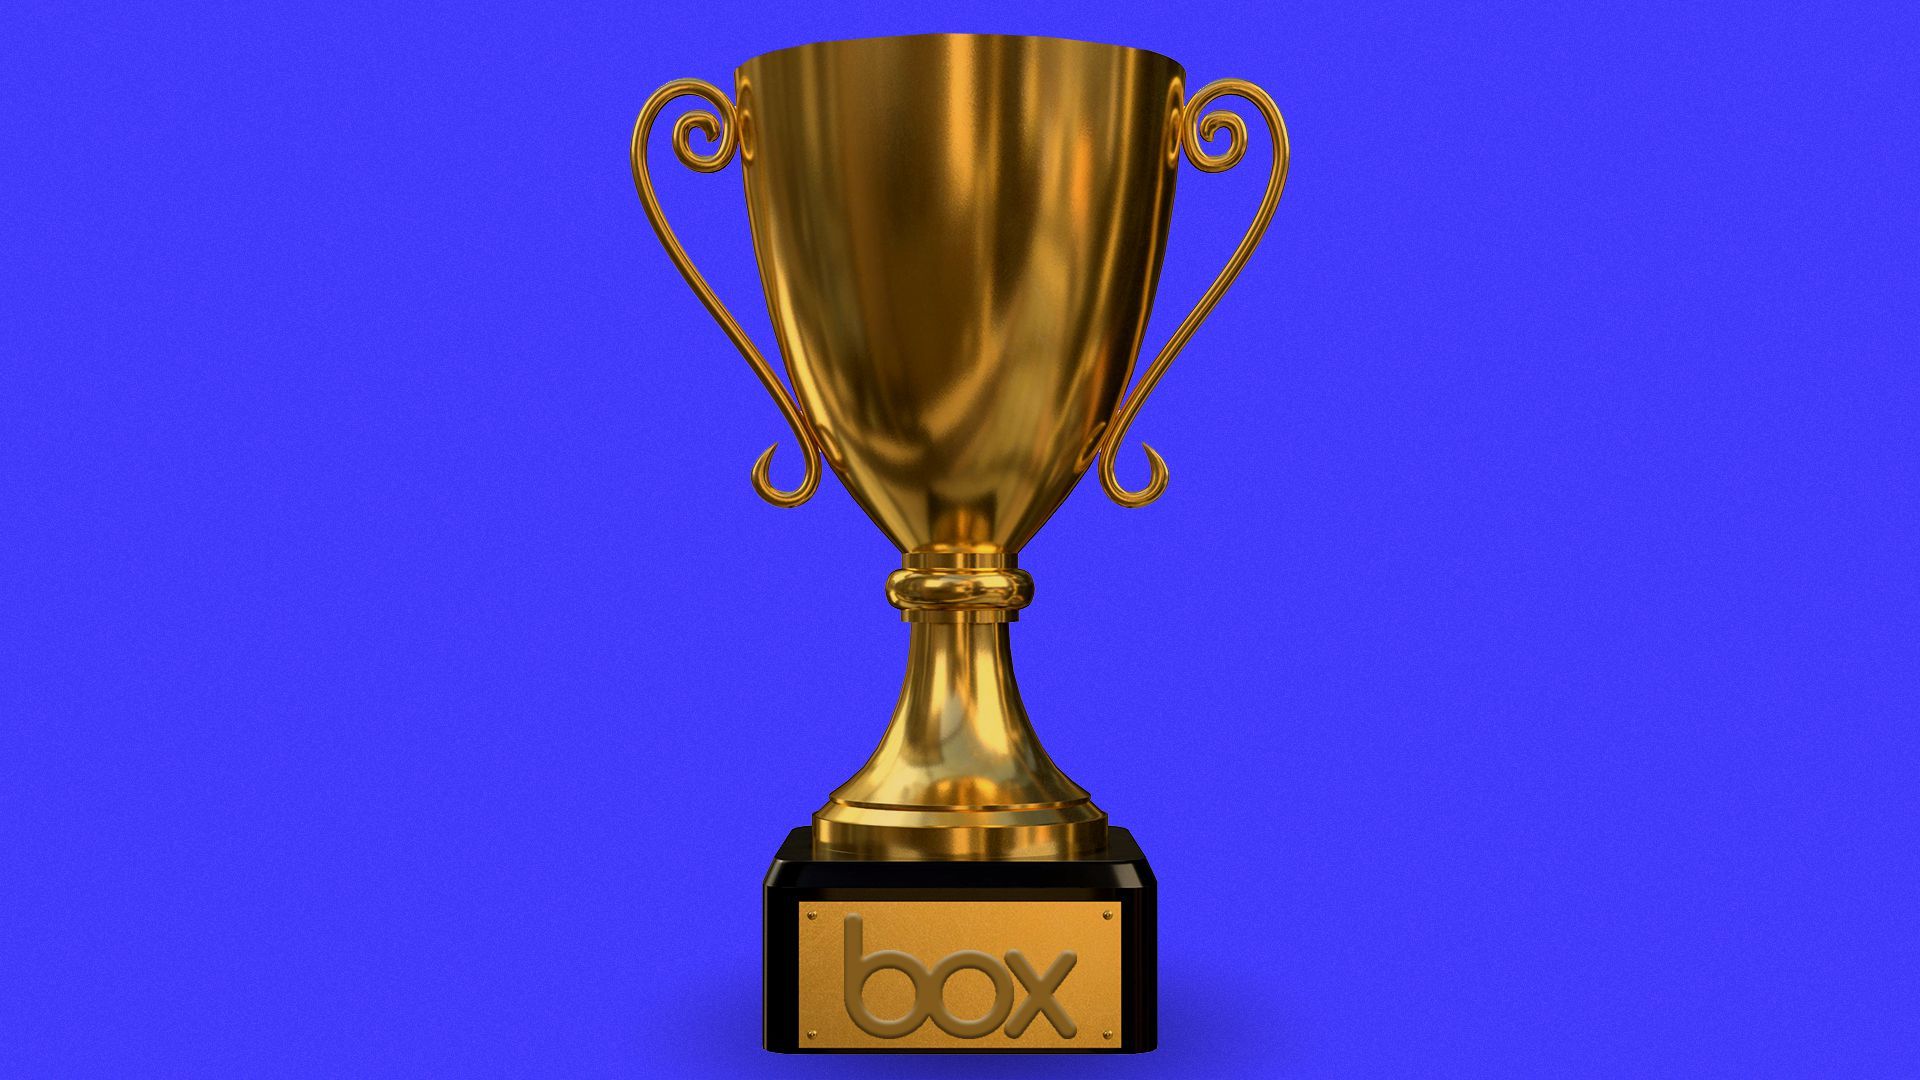 Illustration of a trophy with the box logo on the placard  